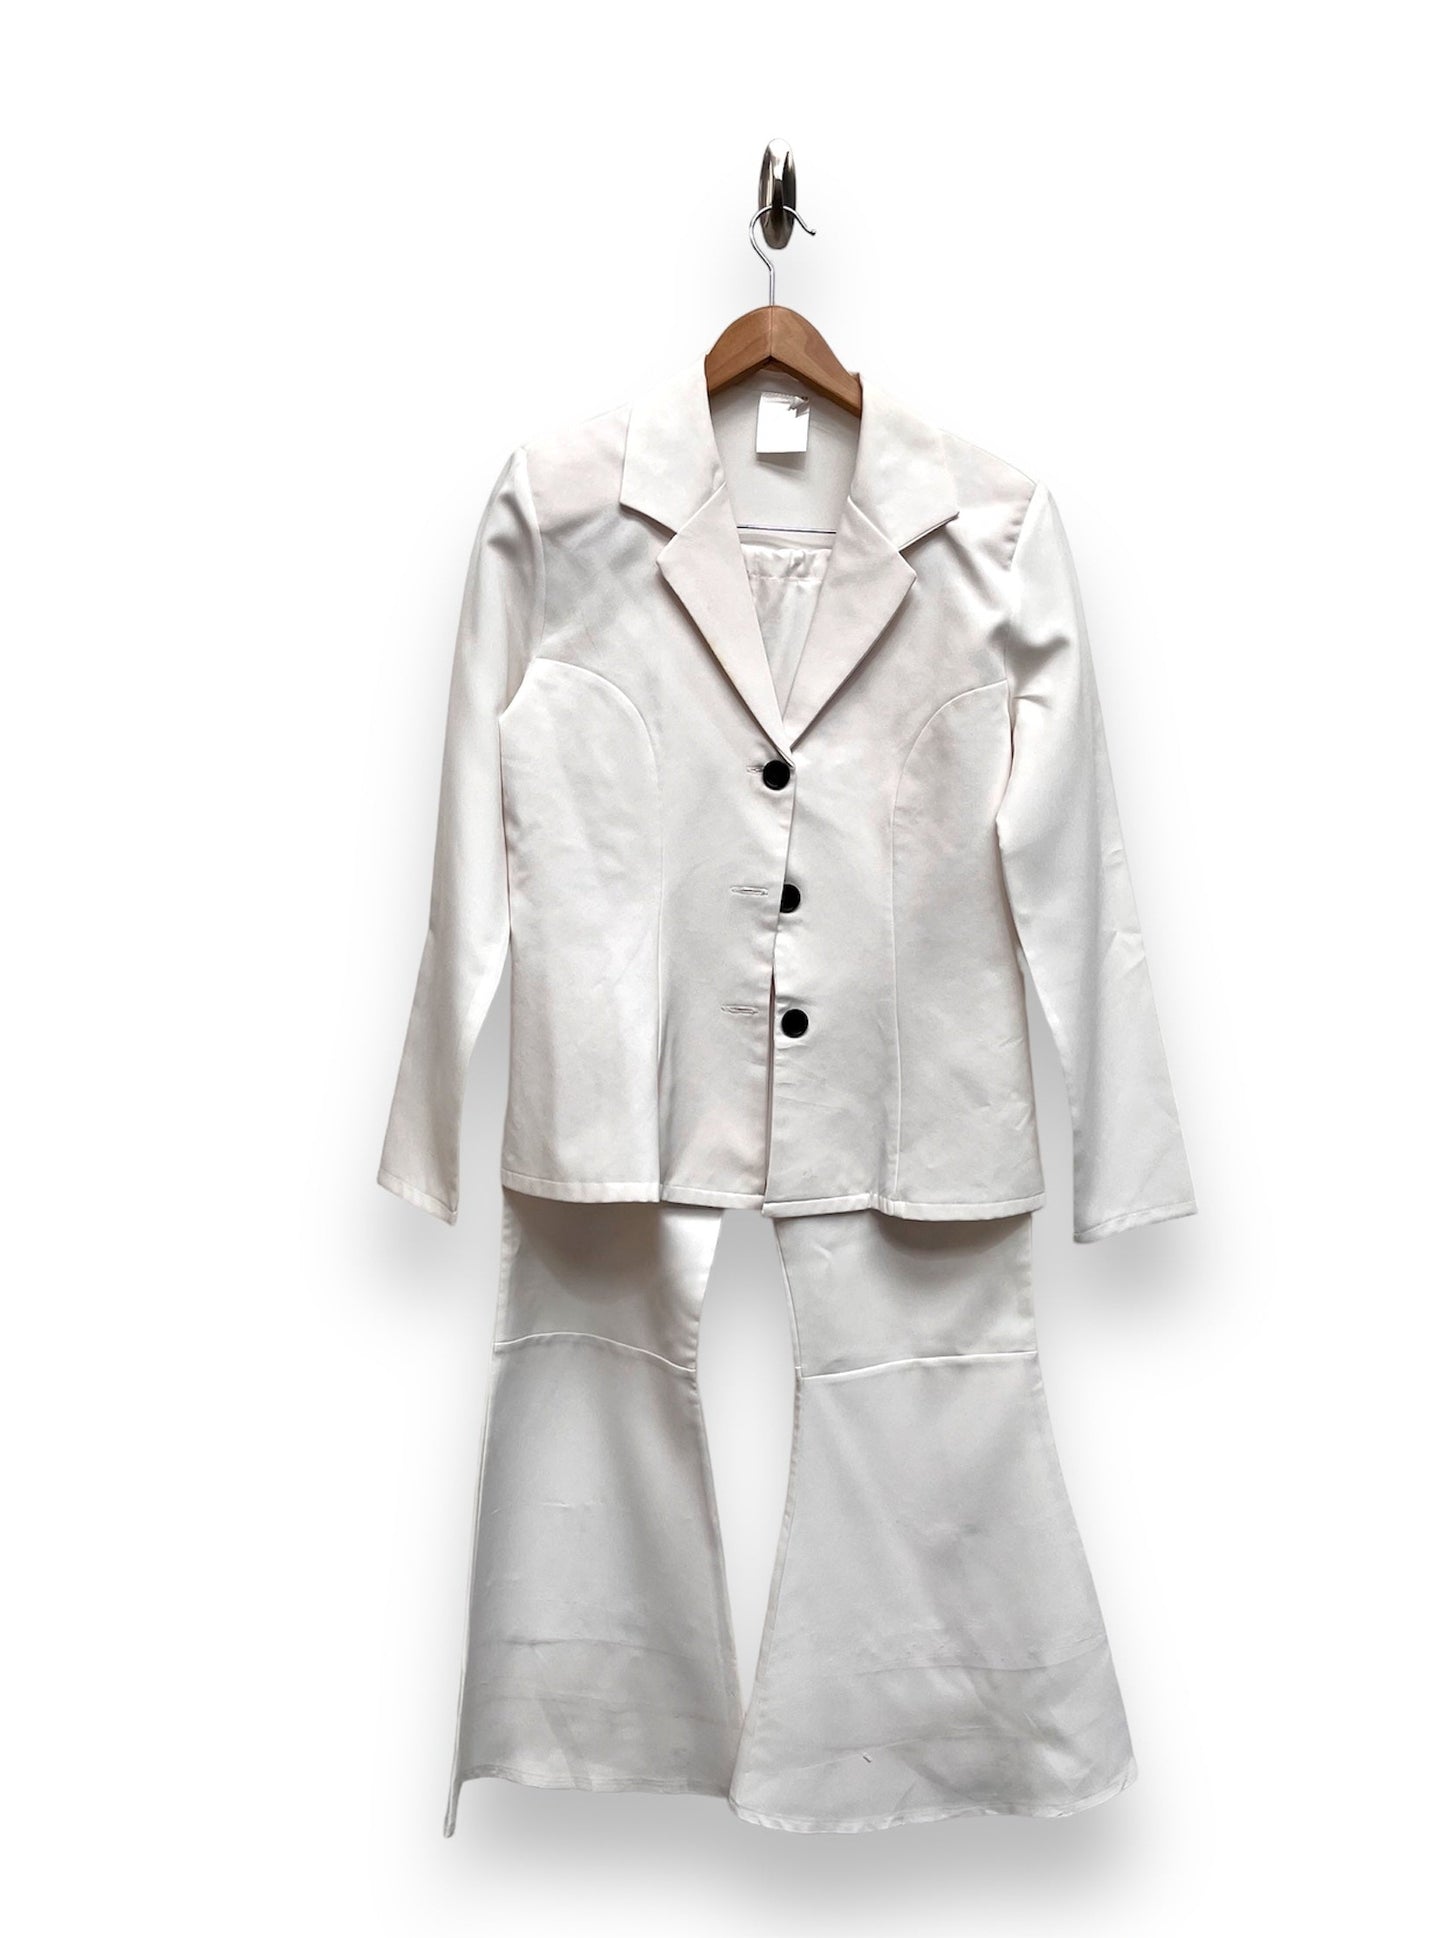 1970s White Flared Suit Charlies Angels Marked